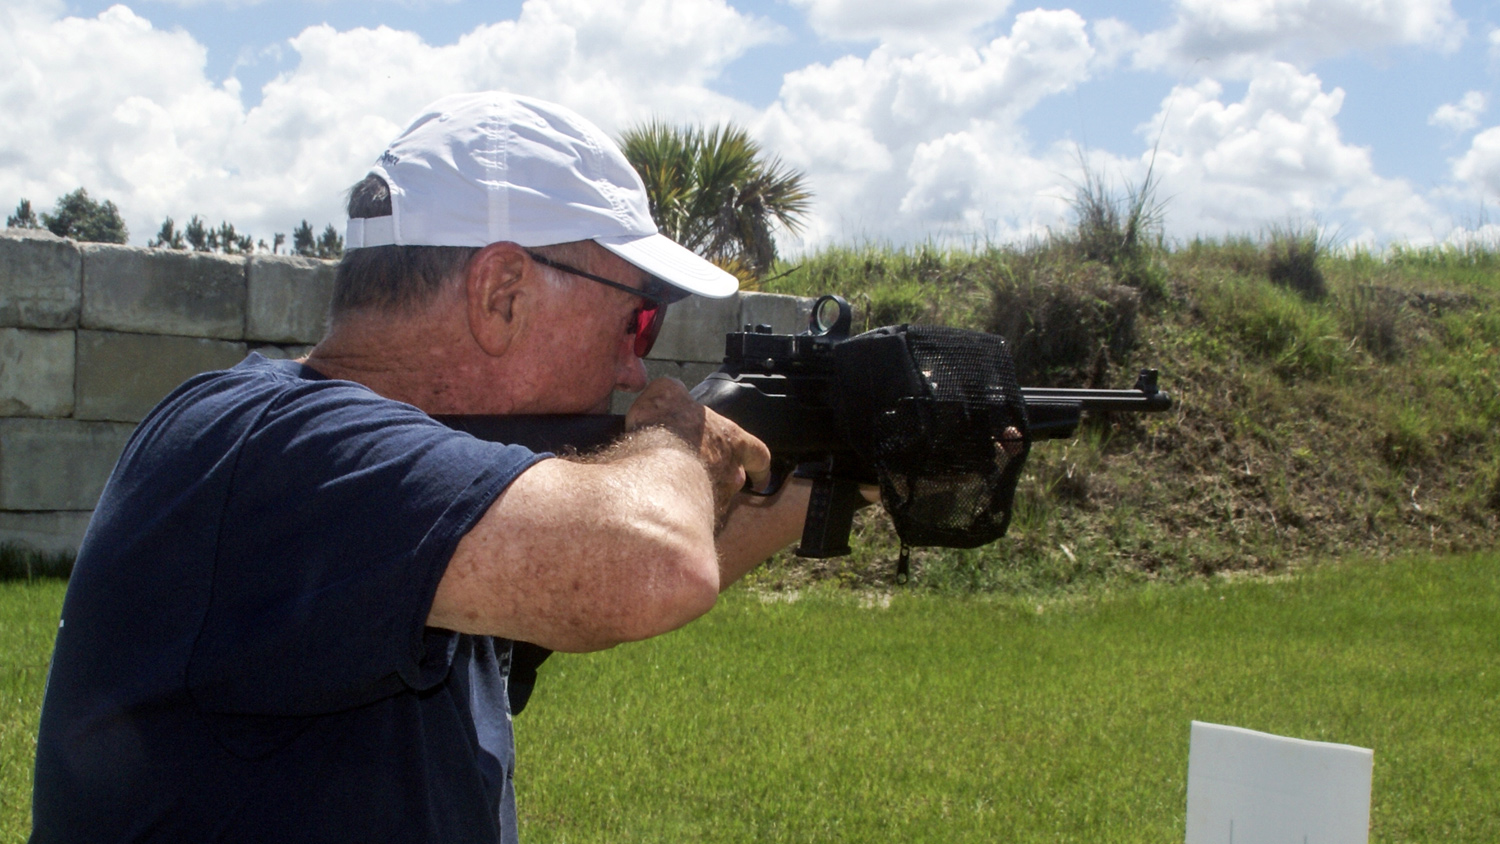 Don Pelling shooting the Ruger PC Carbine 9mm